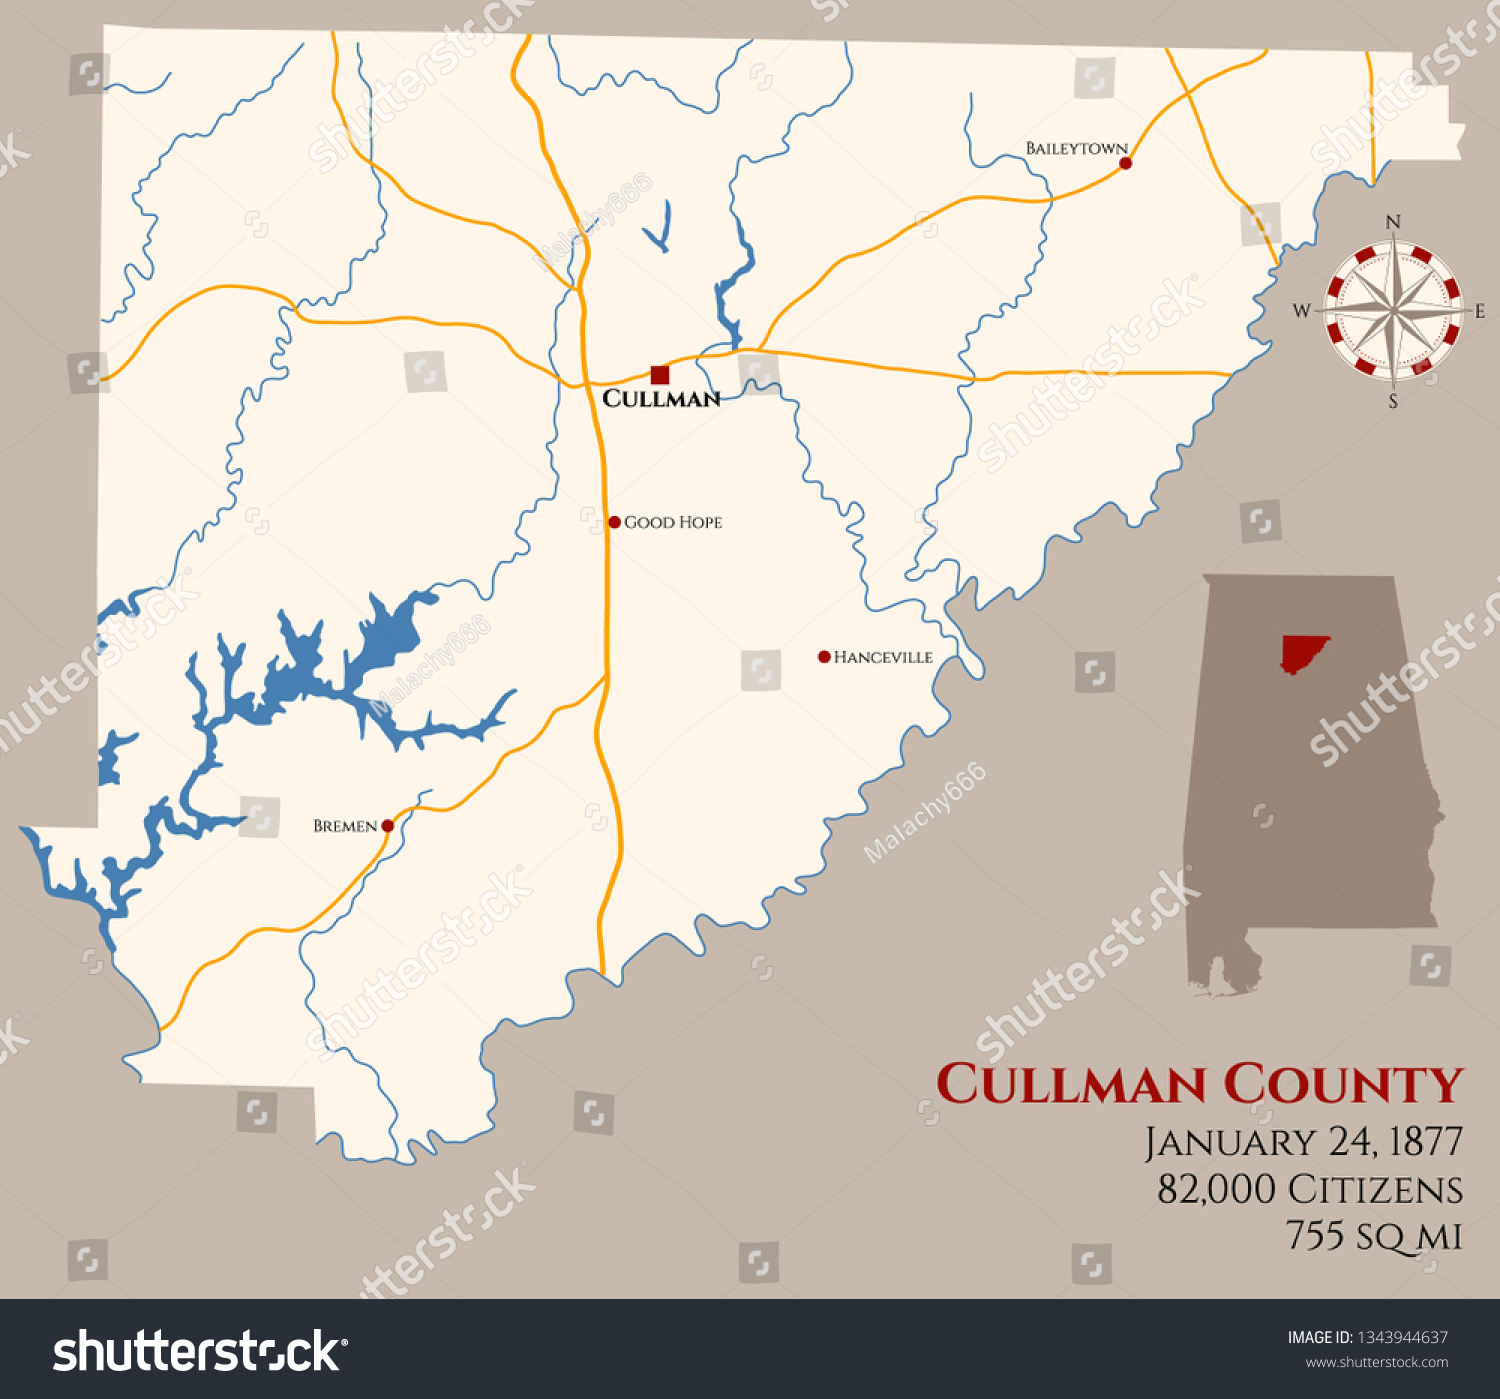 Large Detailed Map Cullman County Alabama Stock Vector Royalty Free 1343944637 Shutterstock 2750